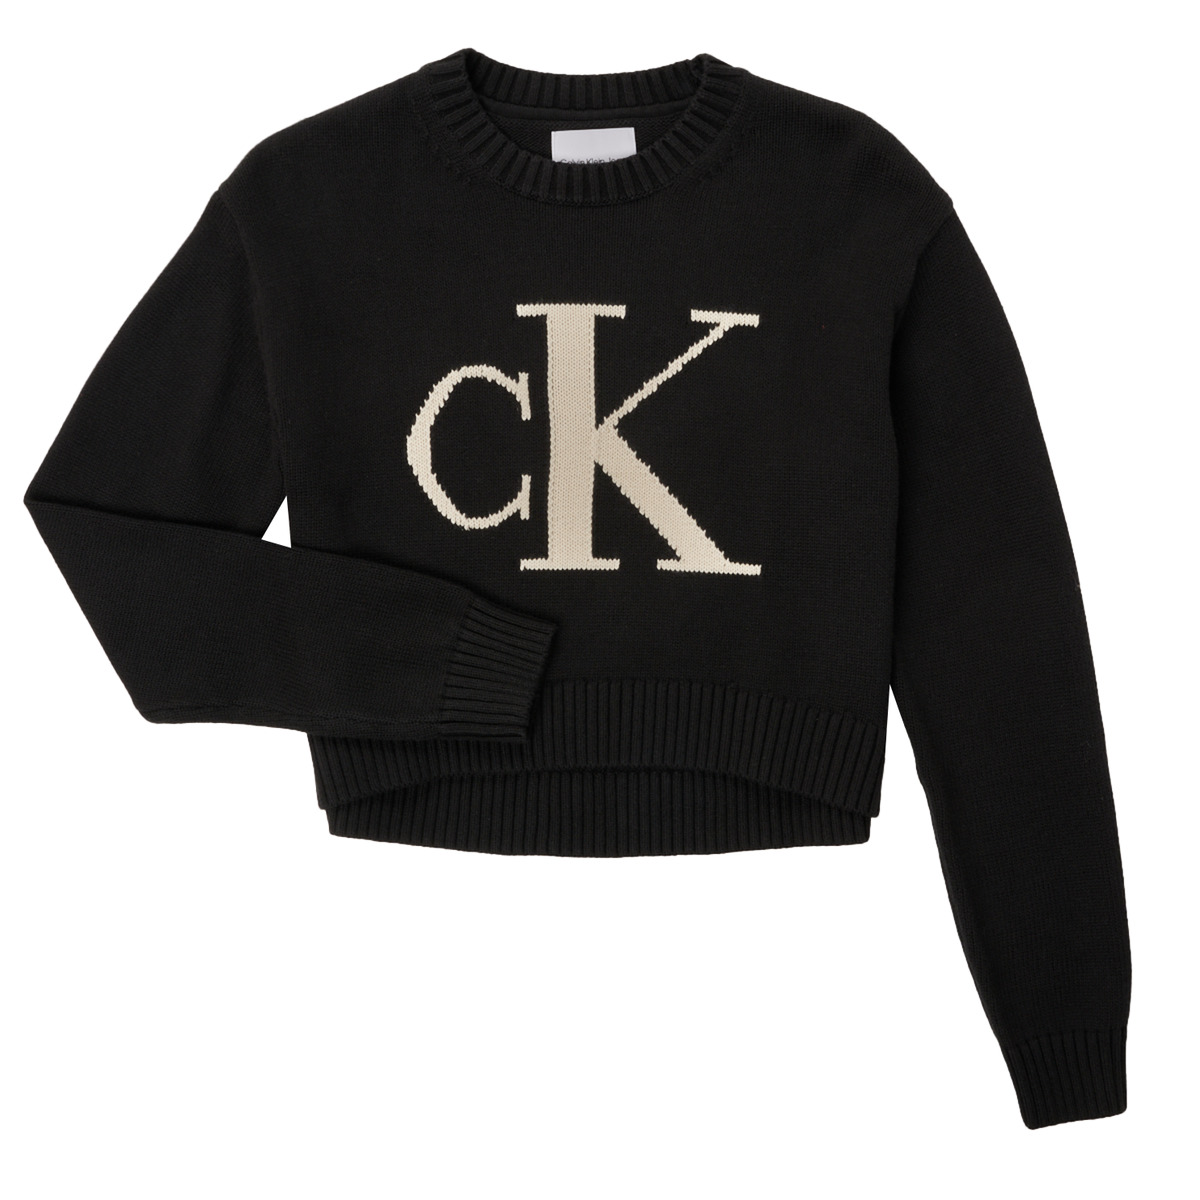 Calvin Klein Jeans MONOGRAM SWEATER Black - Free delivery | Spartoo NET ! -  Clothing sweaters Child